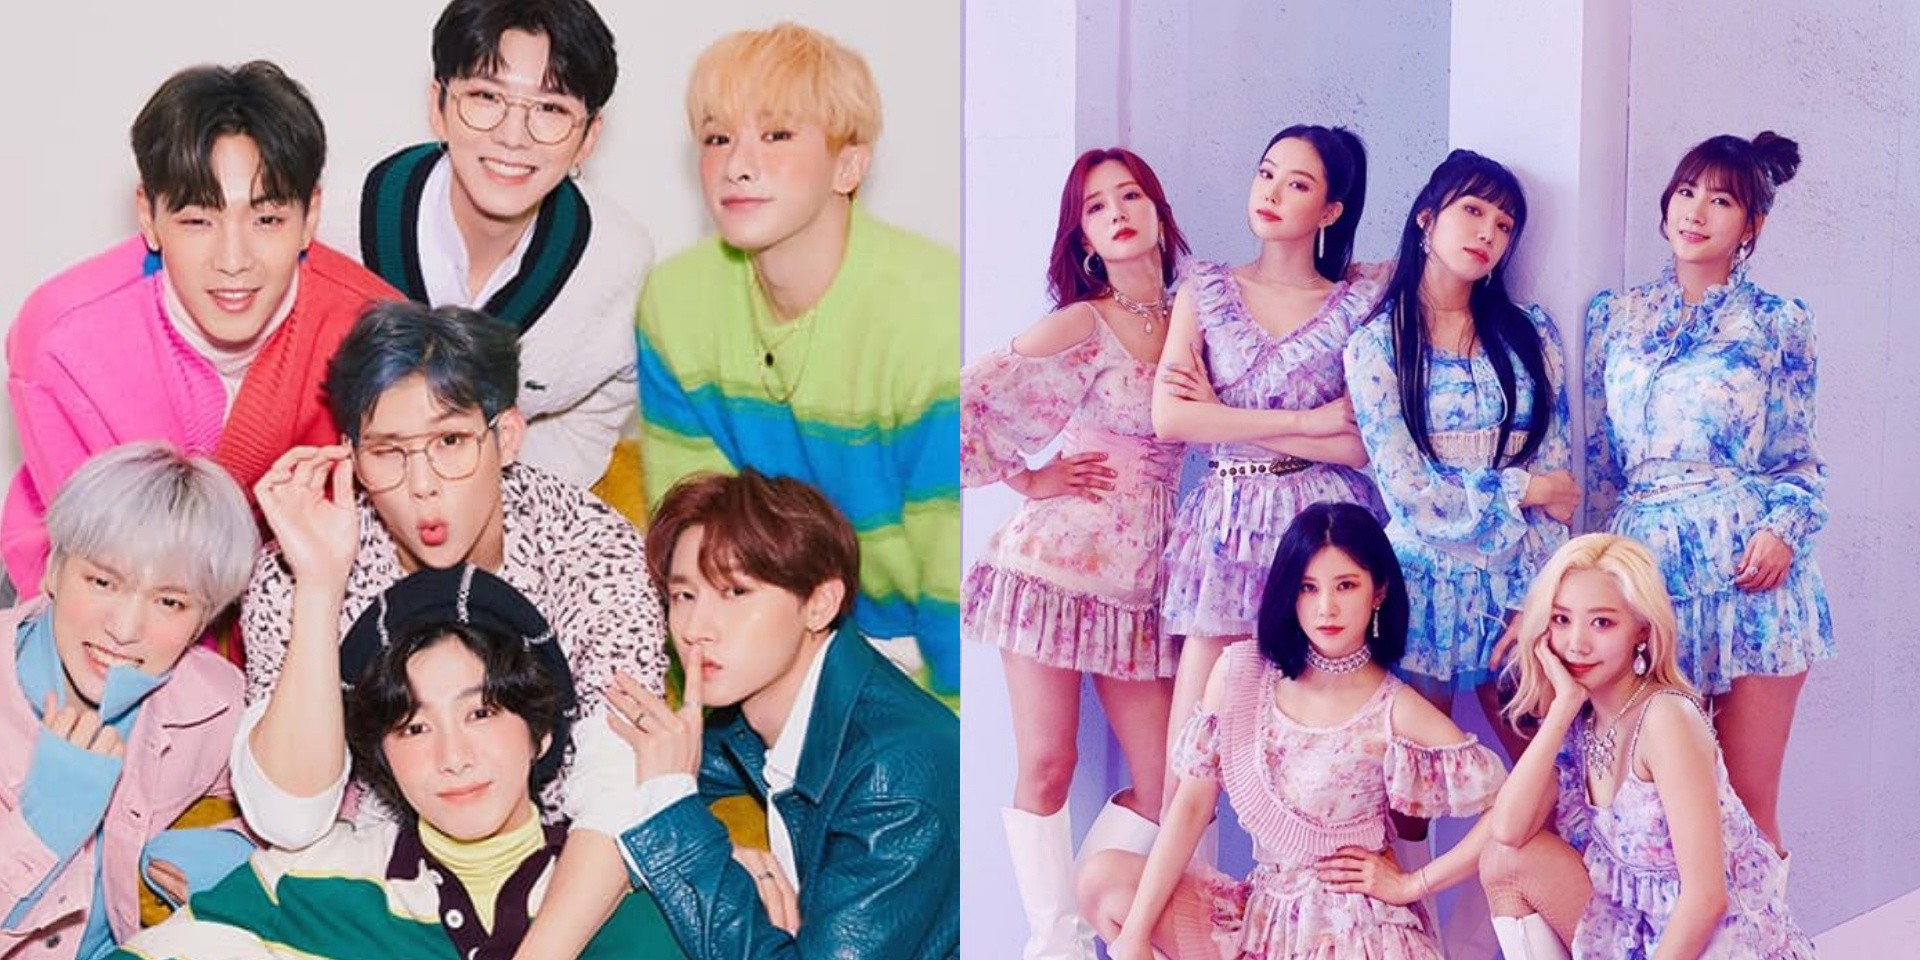 AKMU, Apink, iKON, MONSTA X, and more to perform in TikTok's K-pop concert series to raise funds for COVID-19 relief efforts